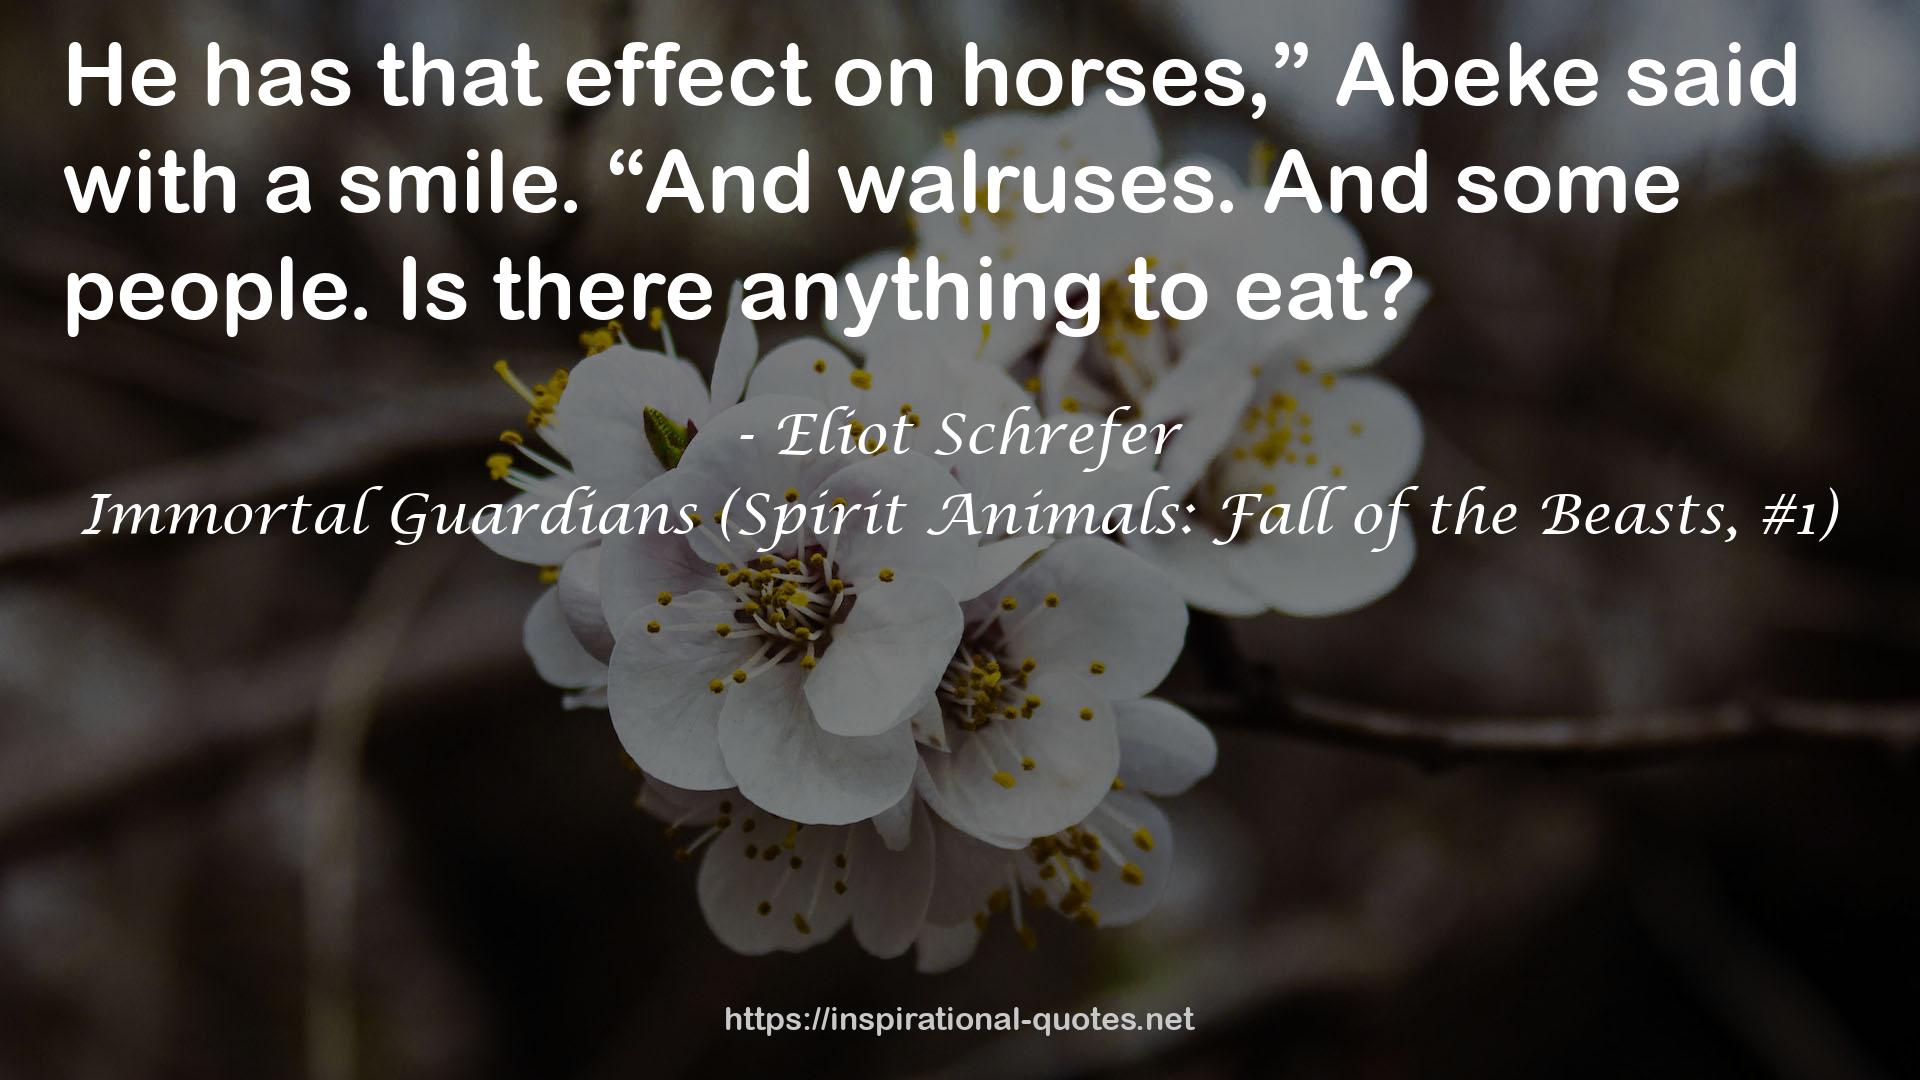 Immortal Guardians (Spirit Animals: Fall of the Beasts, #1) QUOTES